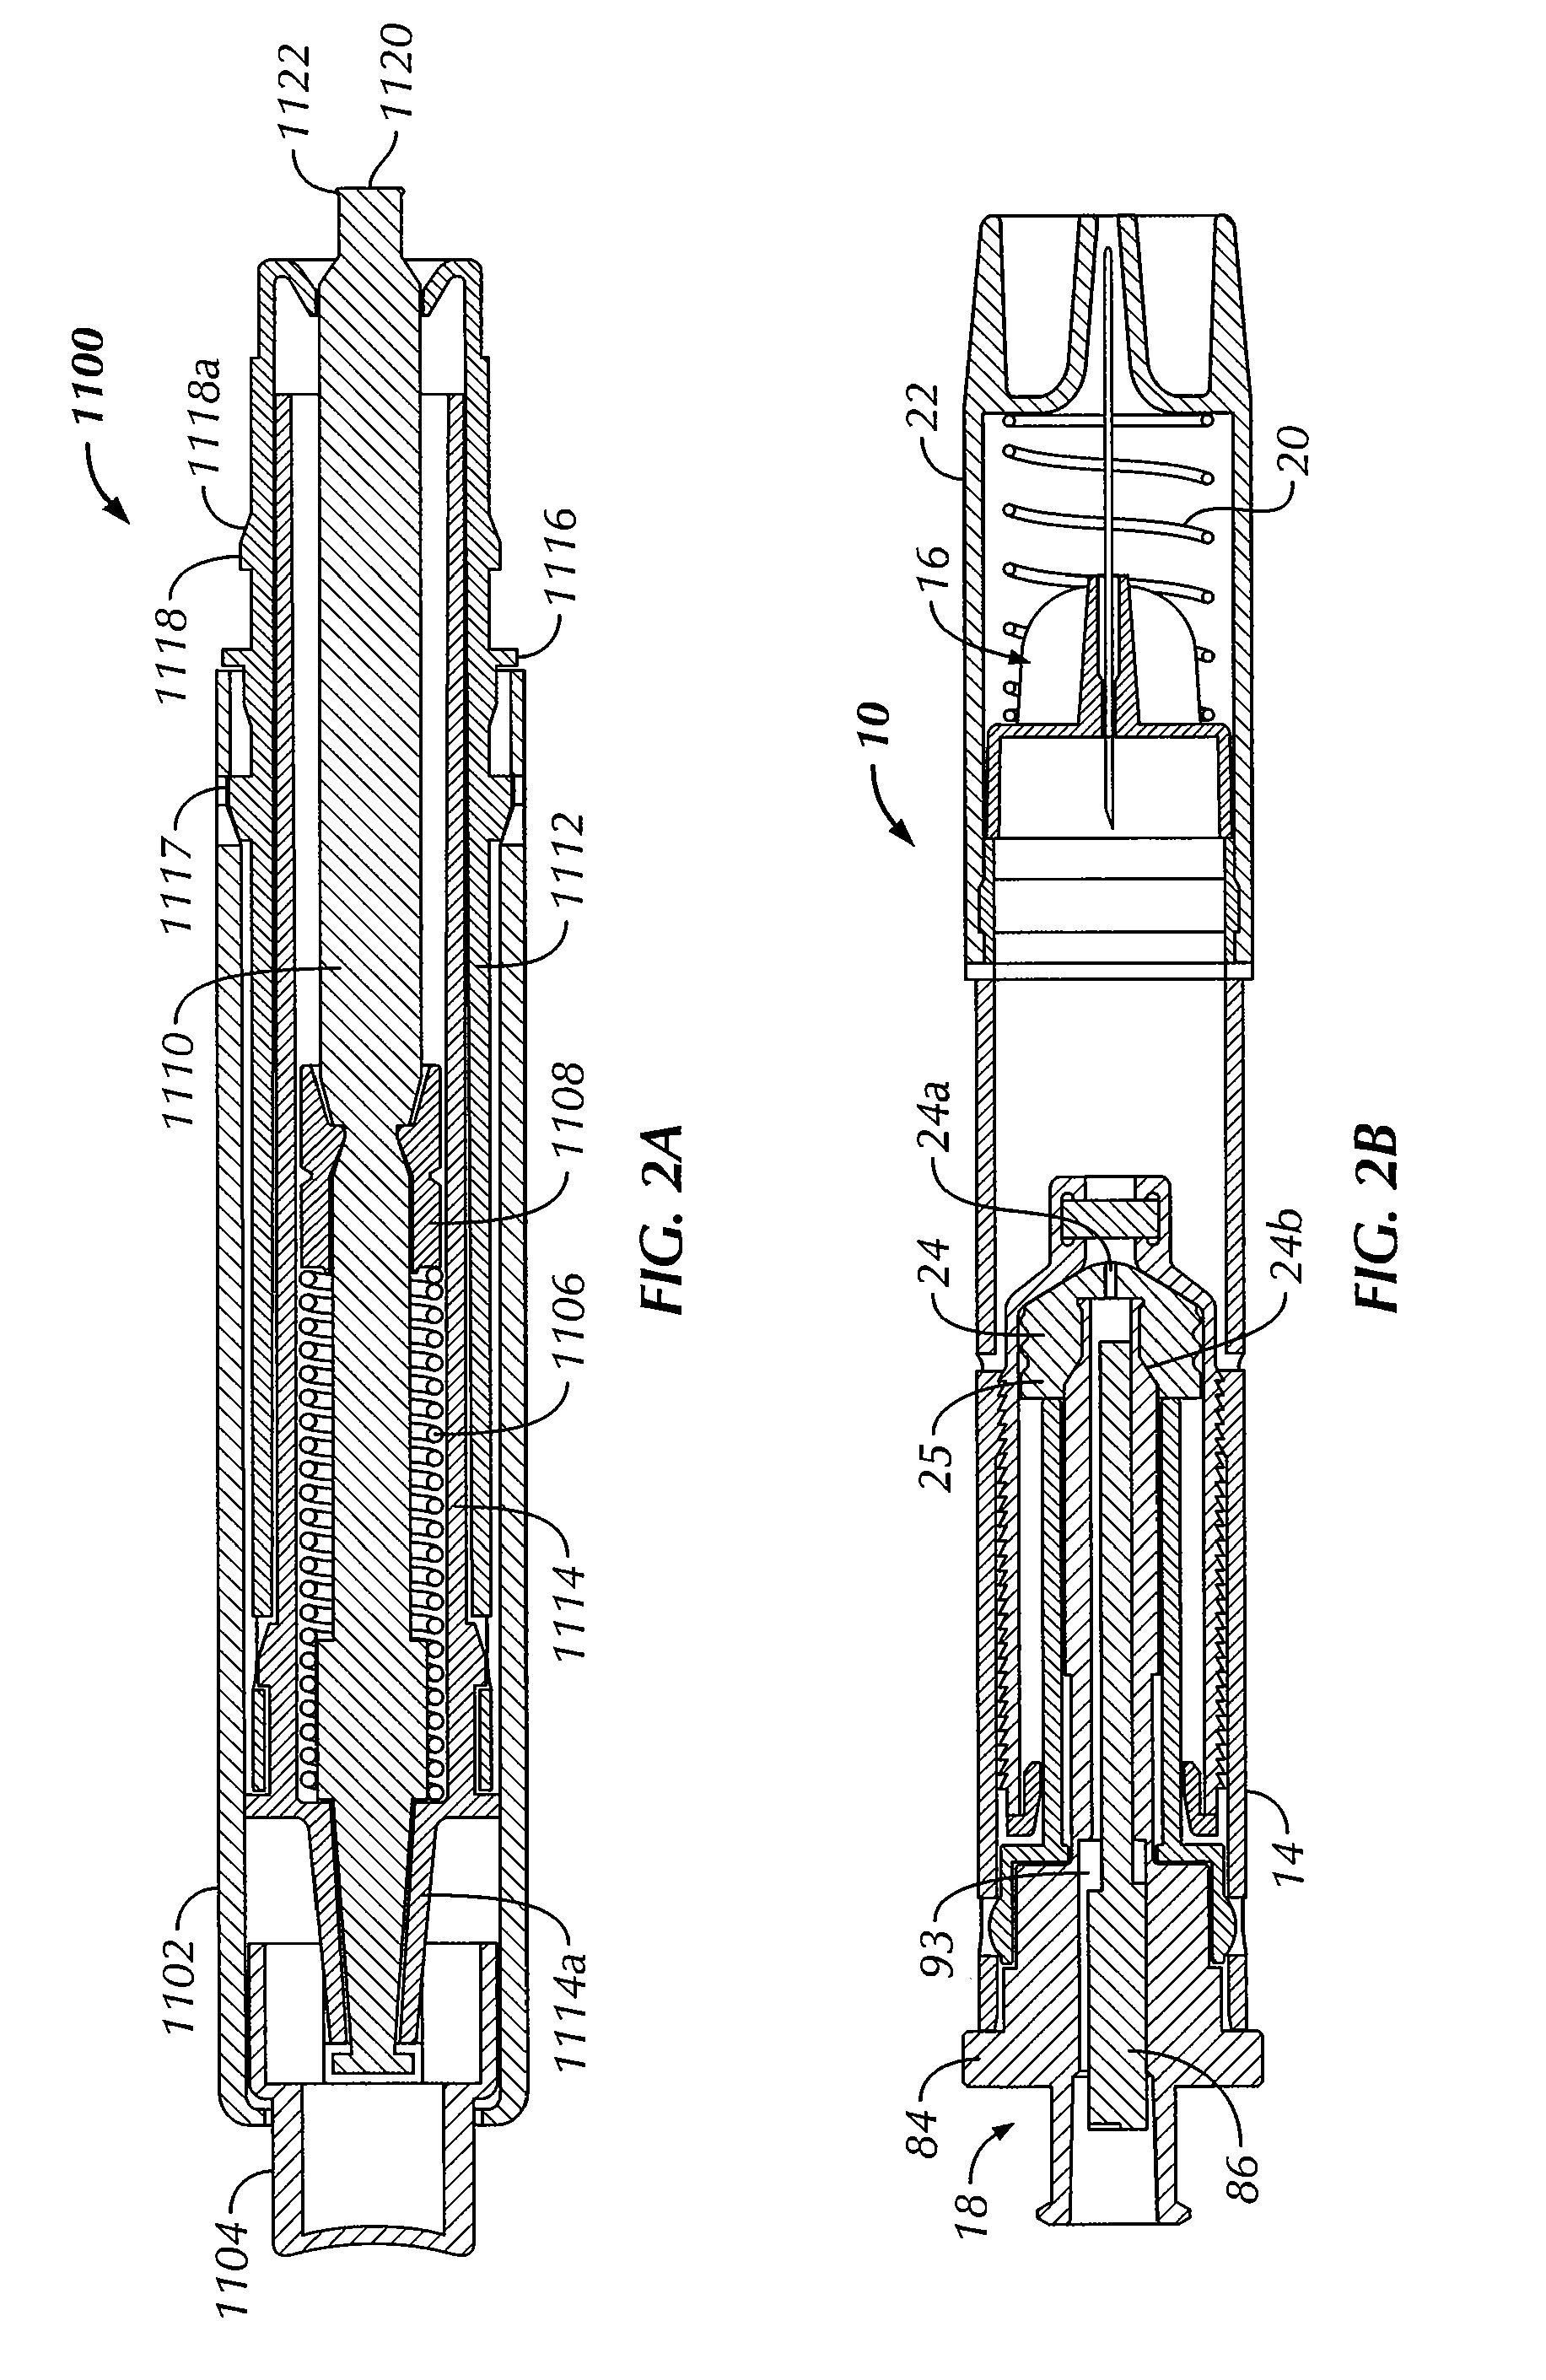 Automatic injection syringe assembly with integrated, fillable medicine container and method of filling an injection syringe assembly